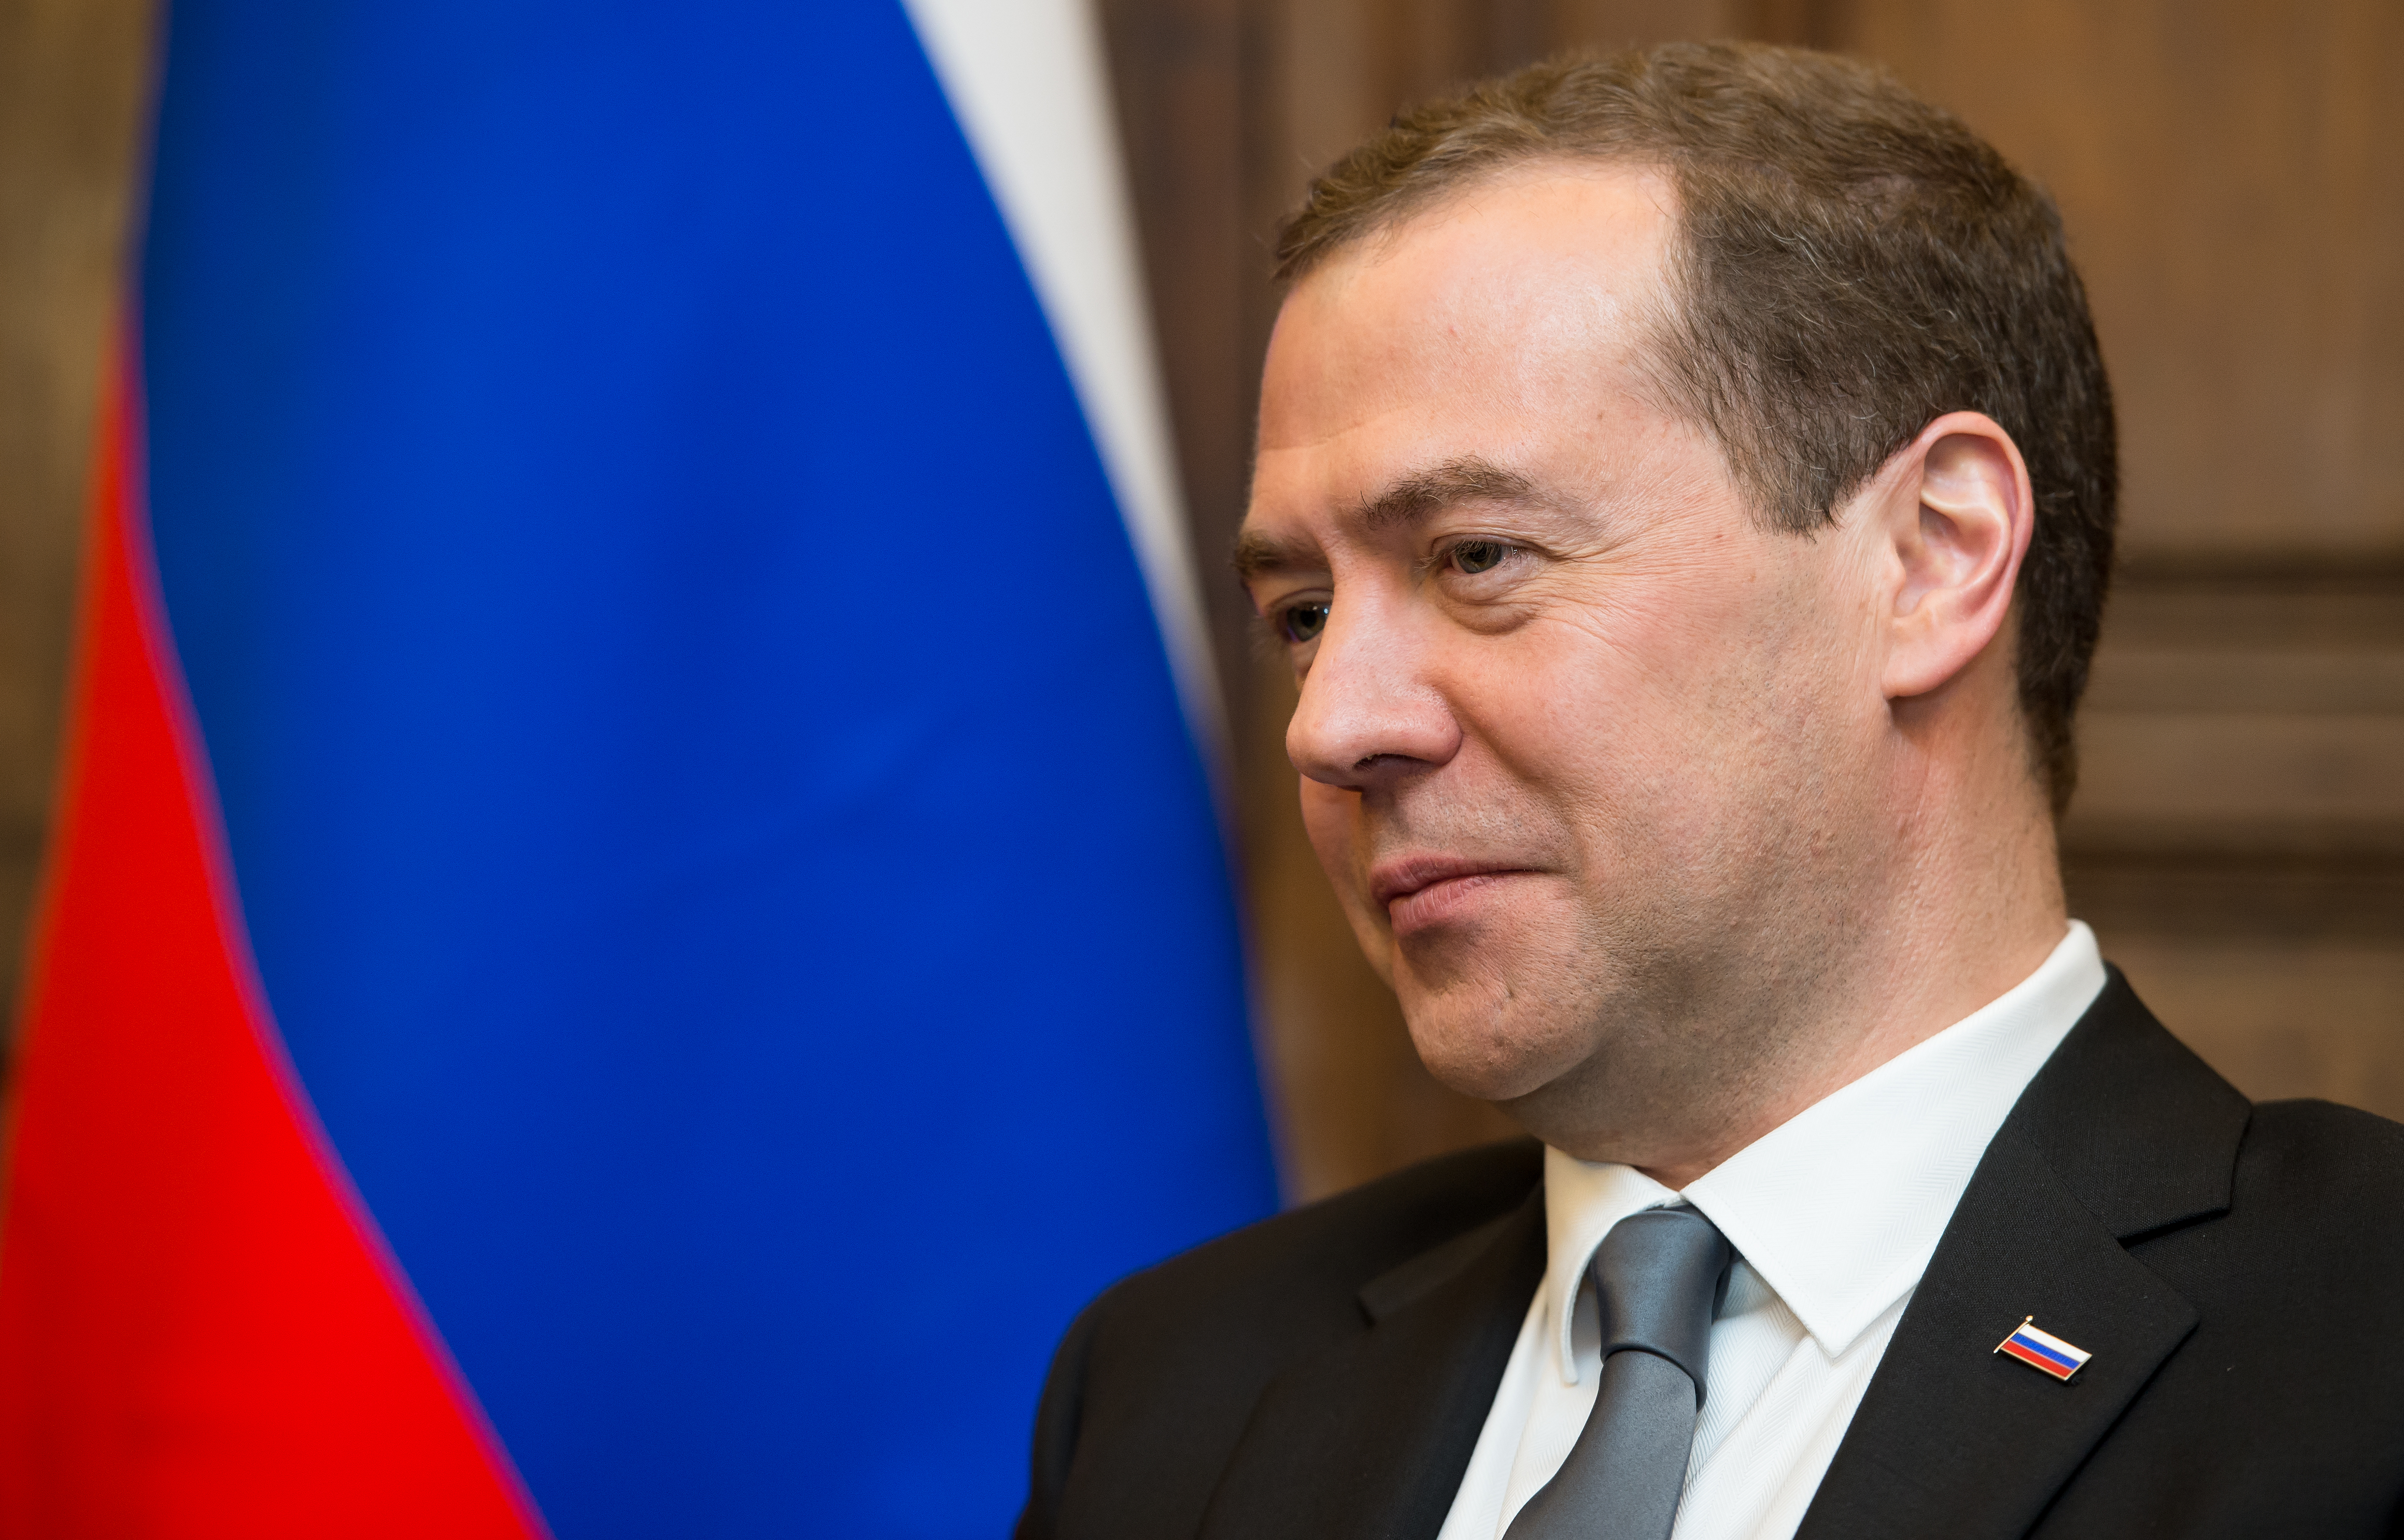 Russian Prime Minister Dmitri Medvedev during a meeting with the Bavarian state premier in Munich on Feb. 13, 2016 (Sven Hoppe—picture-alliance/dpa/AP)